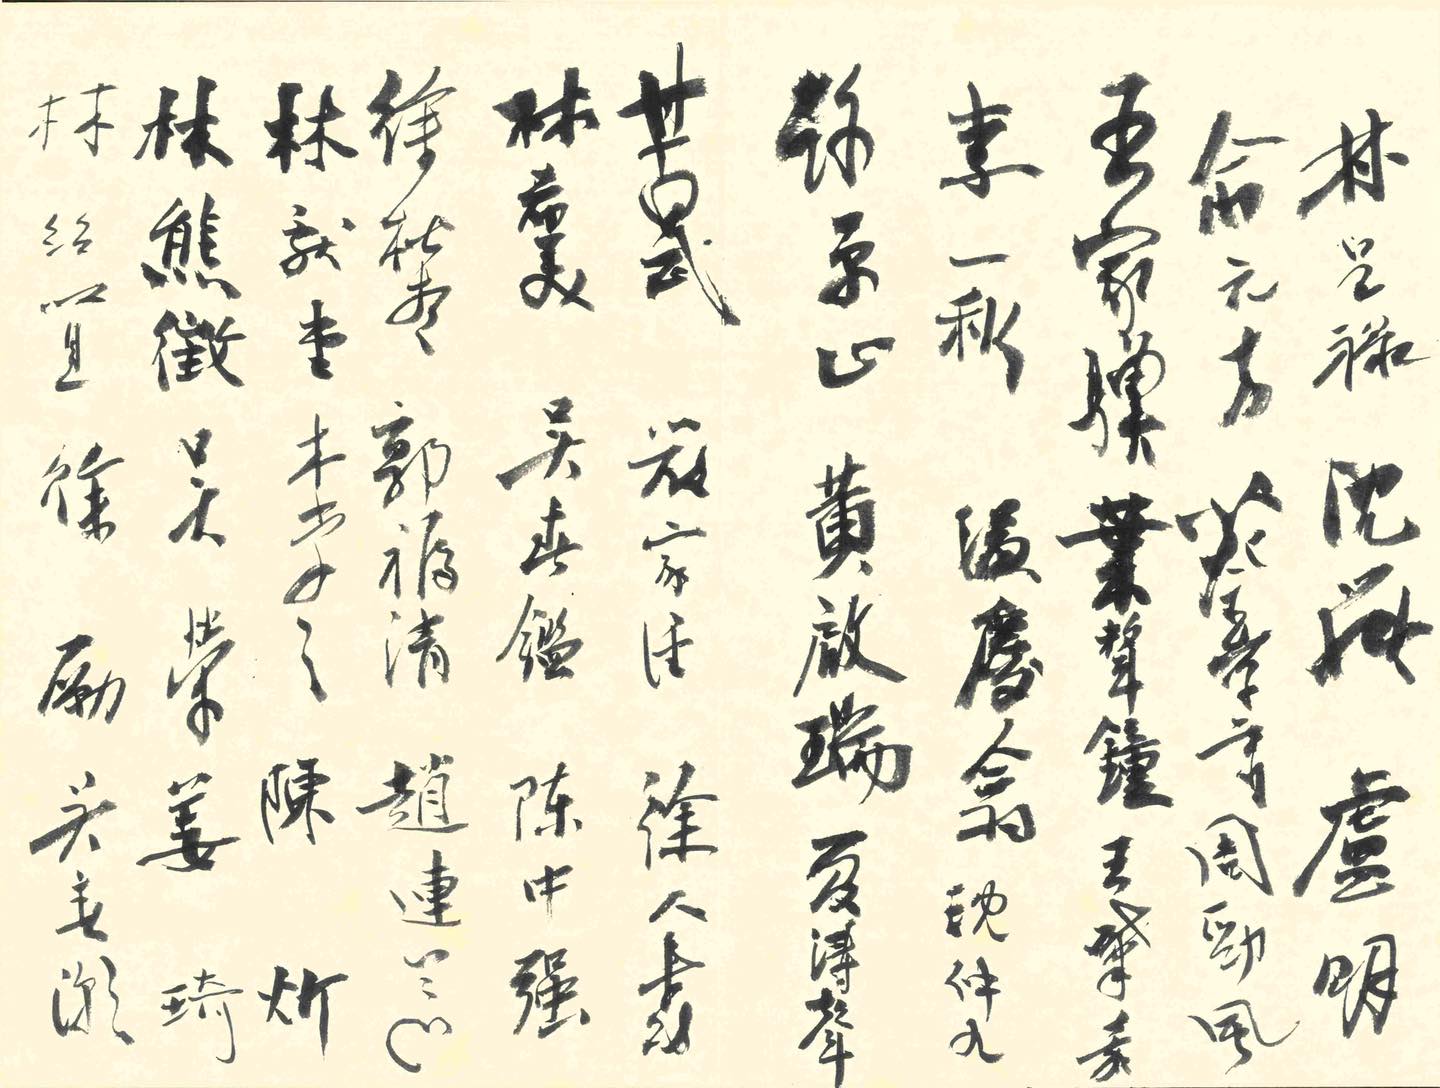 Signature book for those who attended the Japanese surrender ceremony at Taipei, Taiwan on 25 Oct 1945, 3 of 3